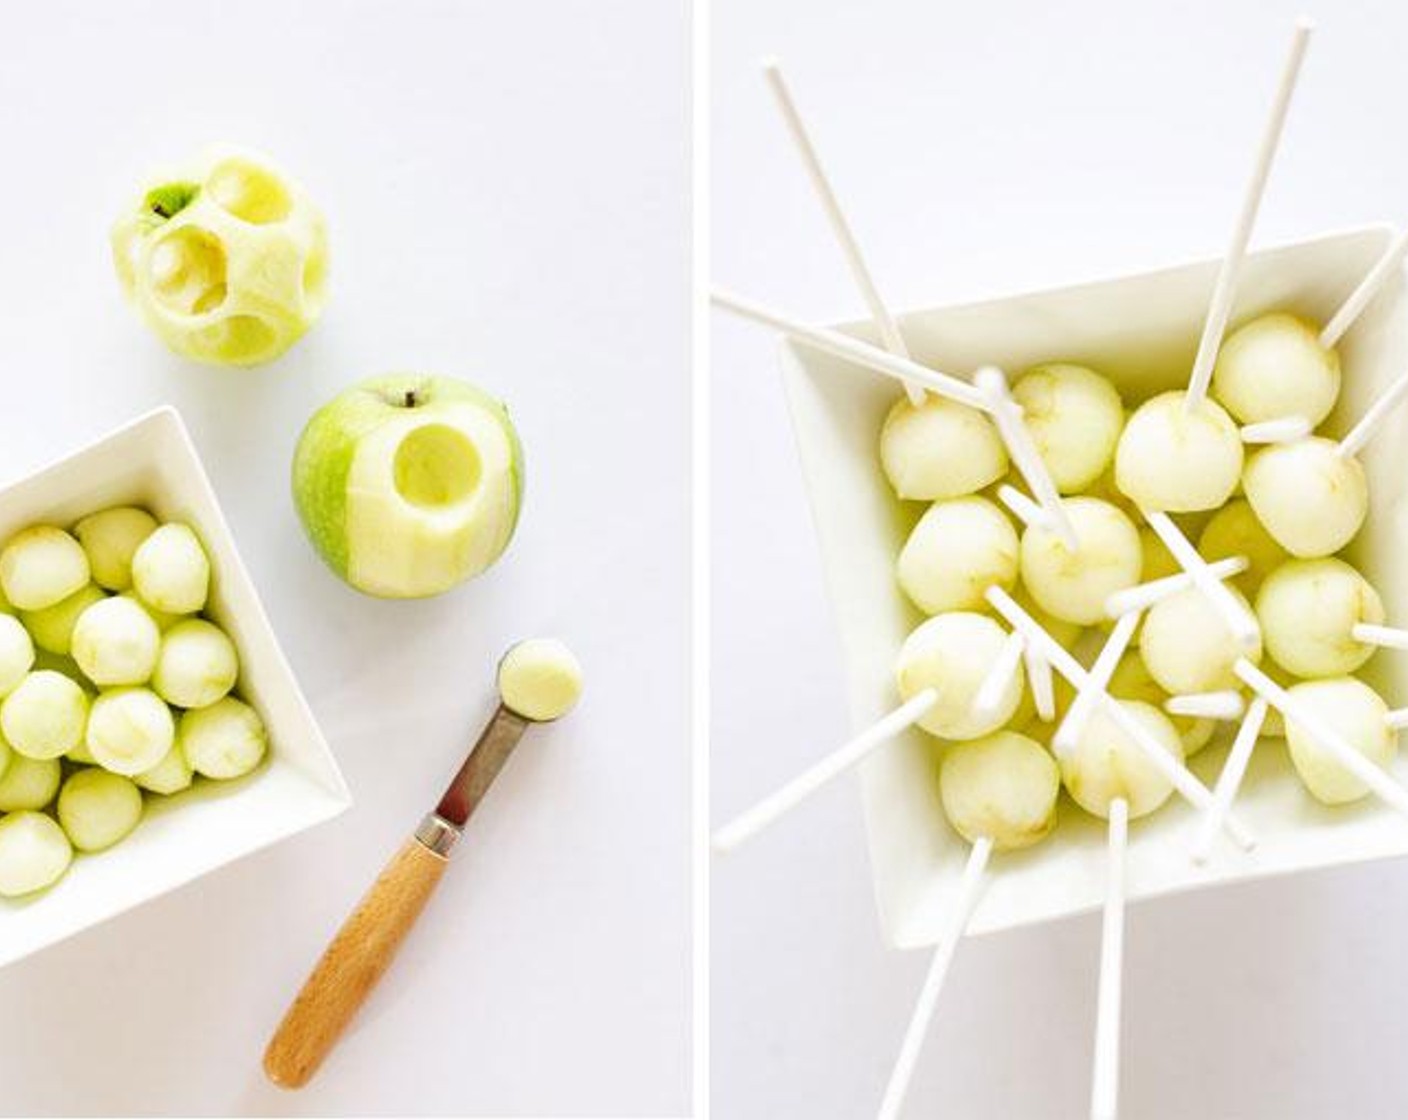 step 2 Peel each Granny Smith Apples (6), then use a melon ball scooper to scoop ball shapes from each apple. Toss the apple balls into the bowl of water to prevent browning while you scoop the rest. When finished, pat dry with paper towels and set on a parchment paper-lined baking sheet. Stick a lollipop stick into each, then set in the freezer for 15 minutes.